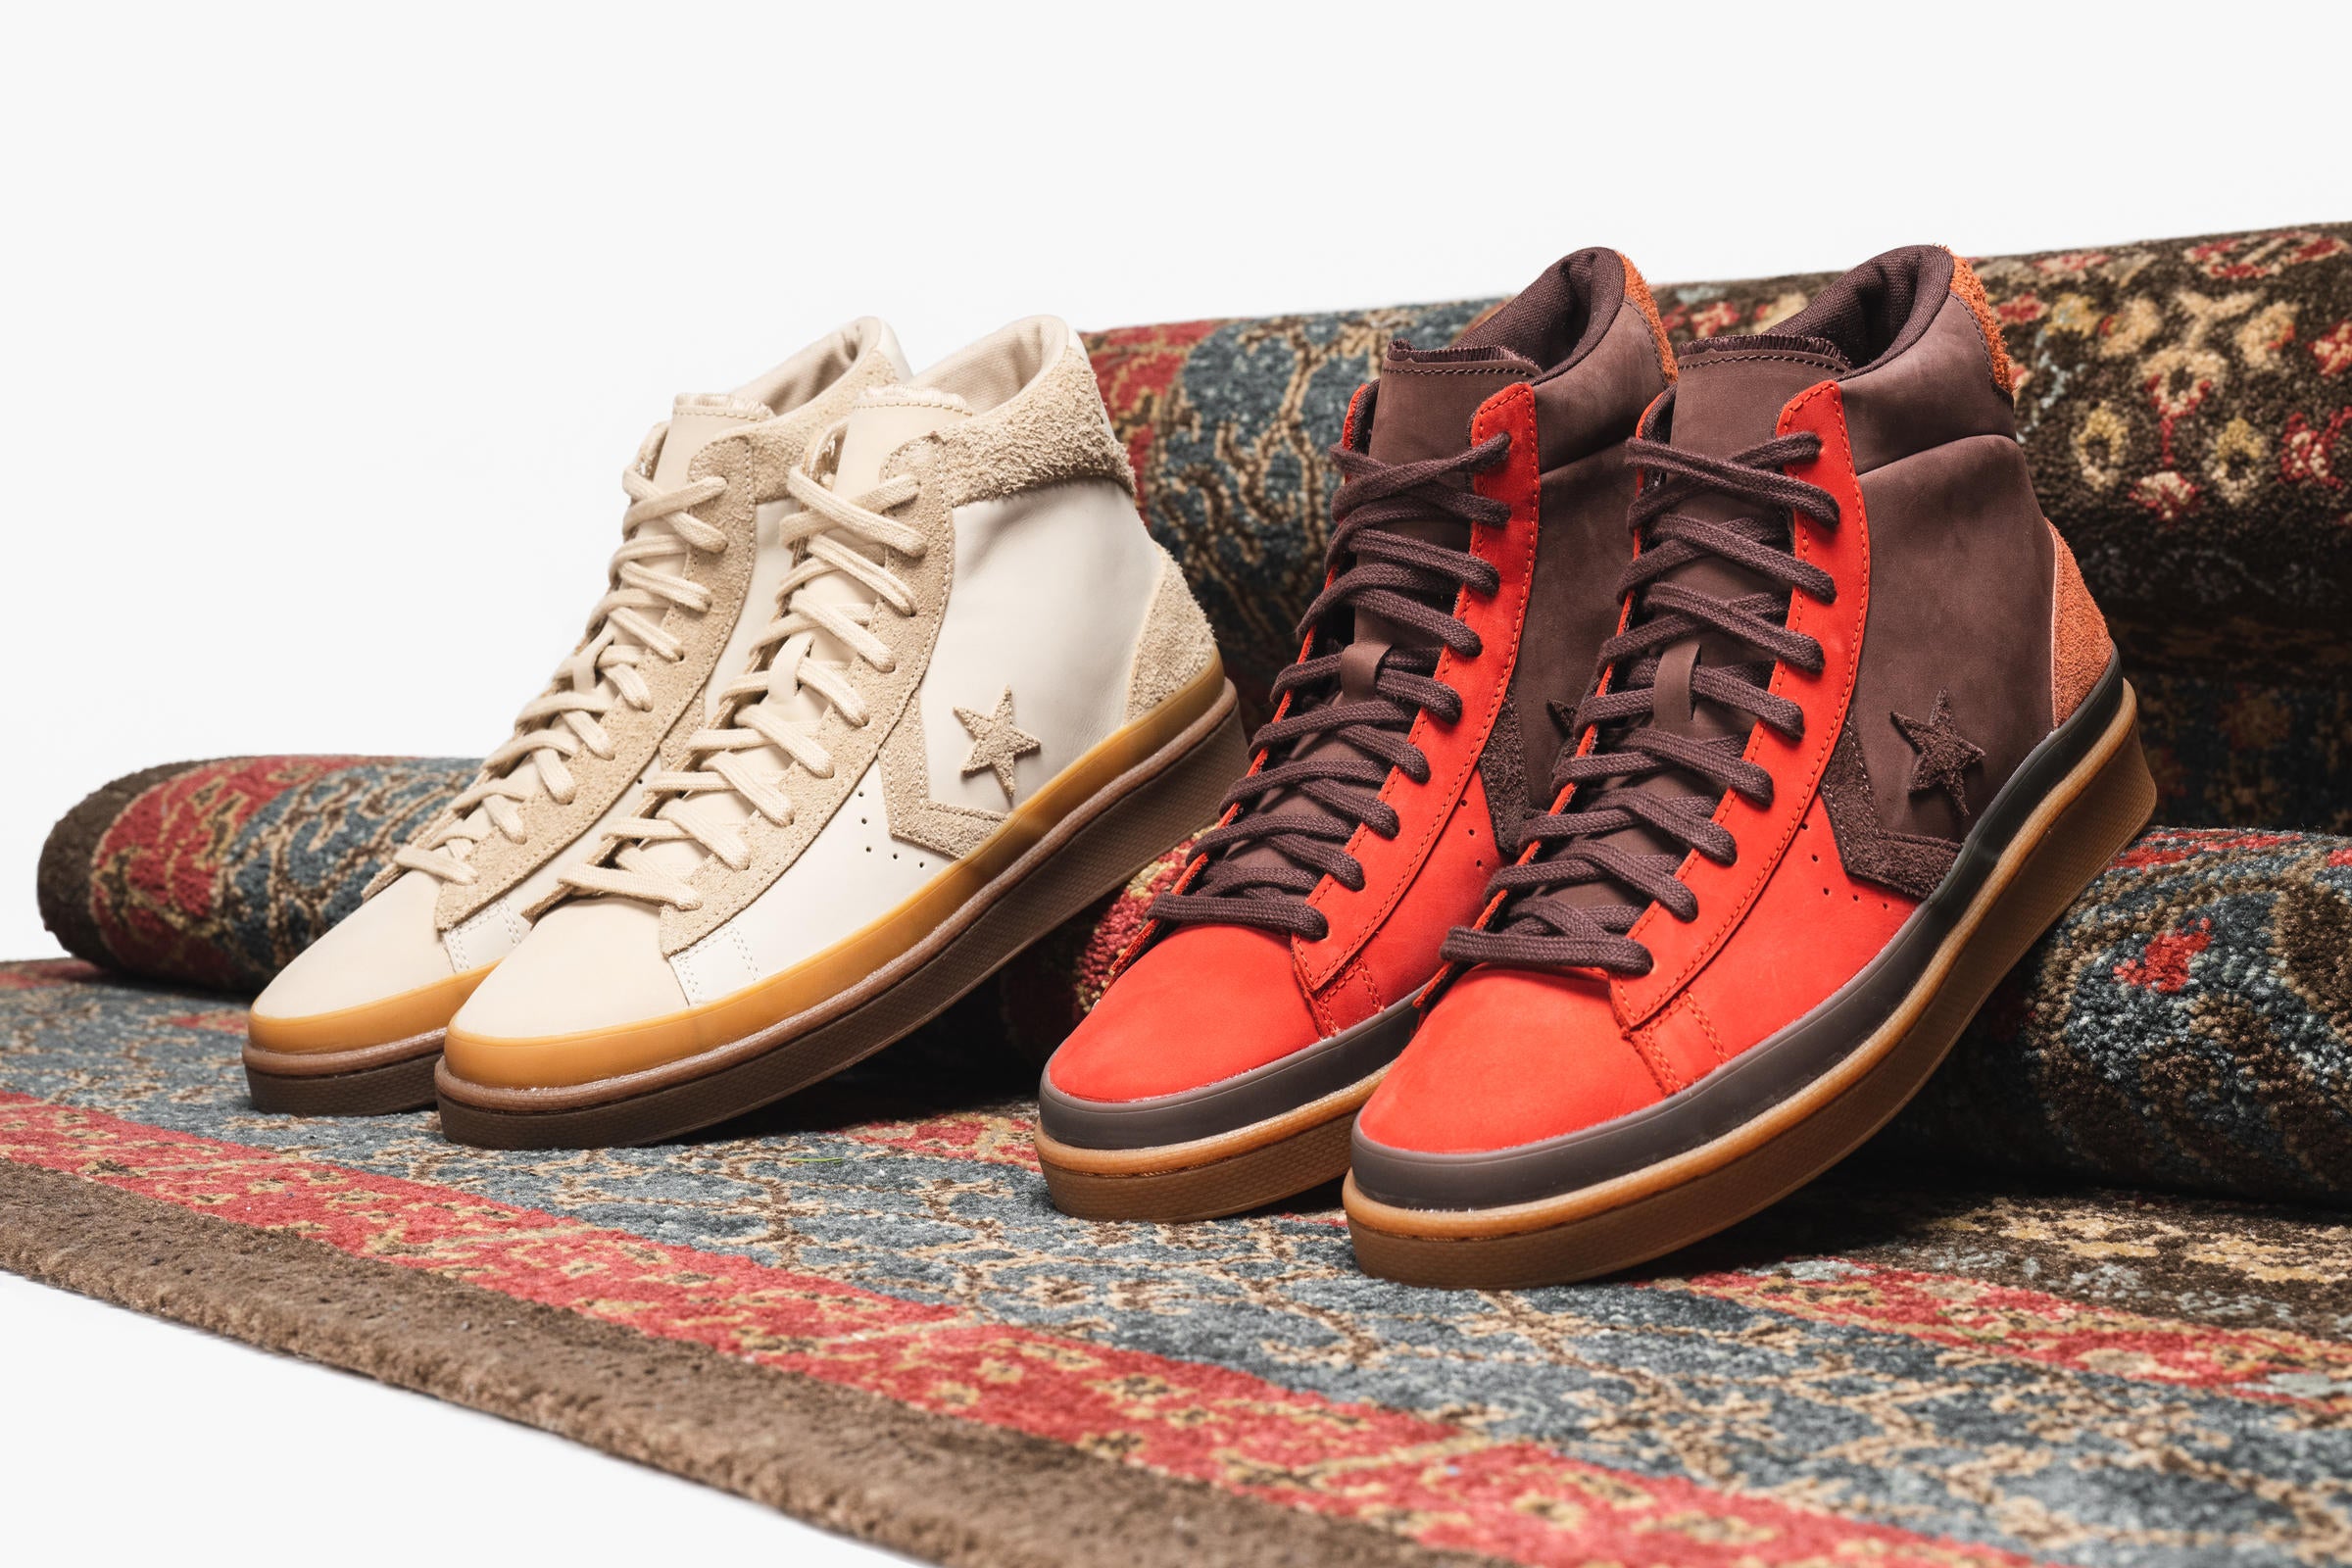 Converse Pro Leather, Shop Sneakers Online